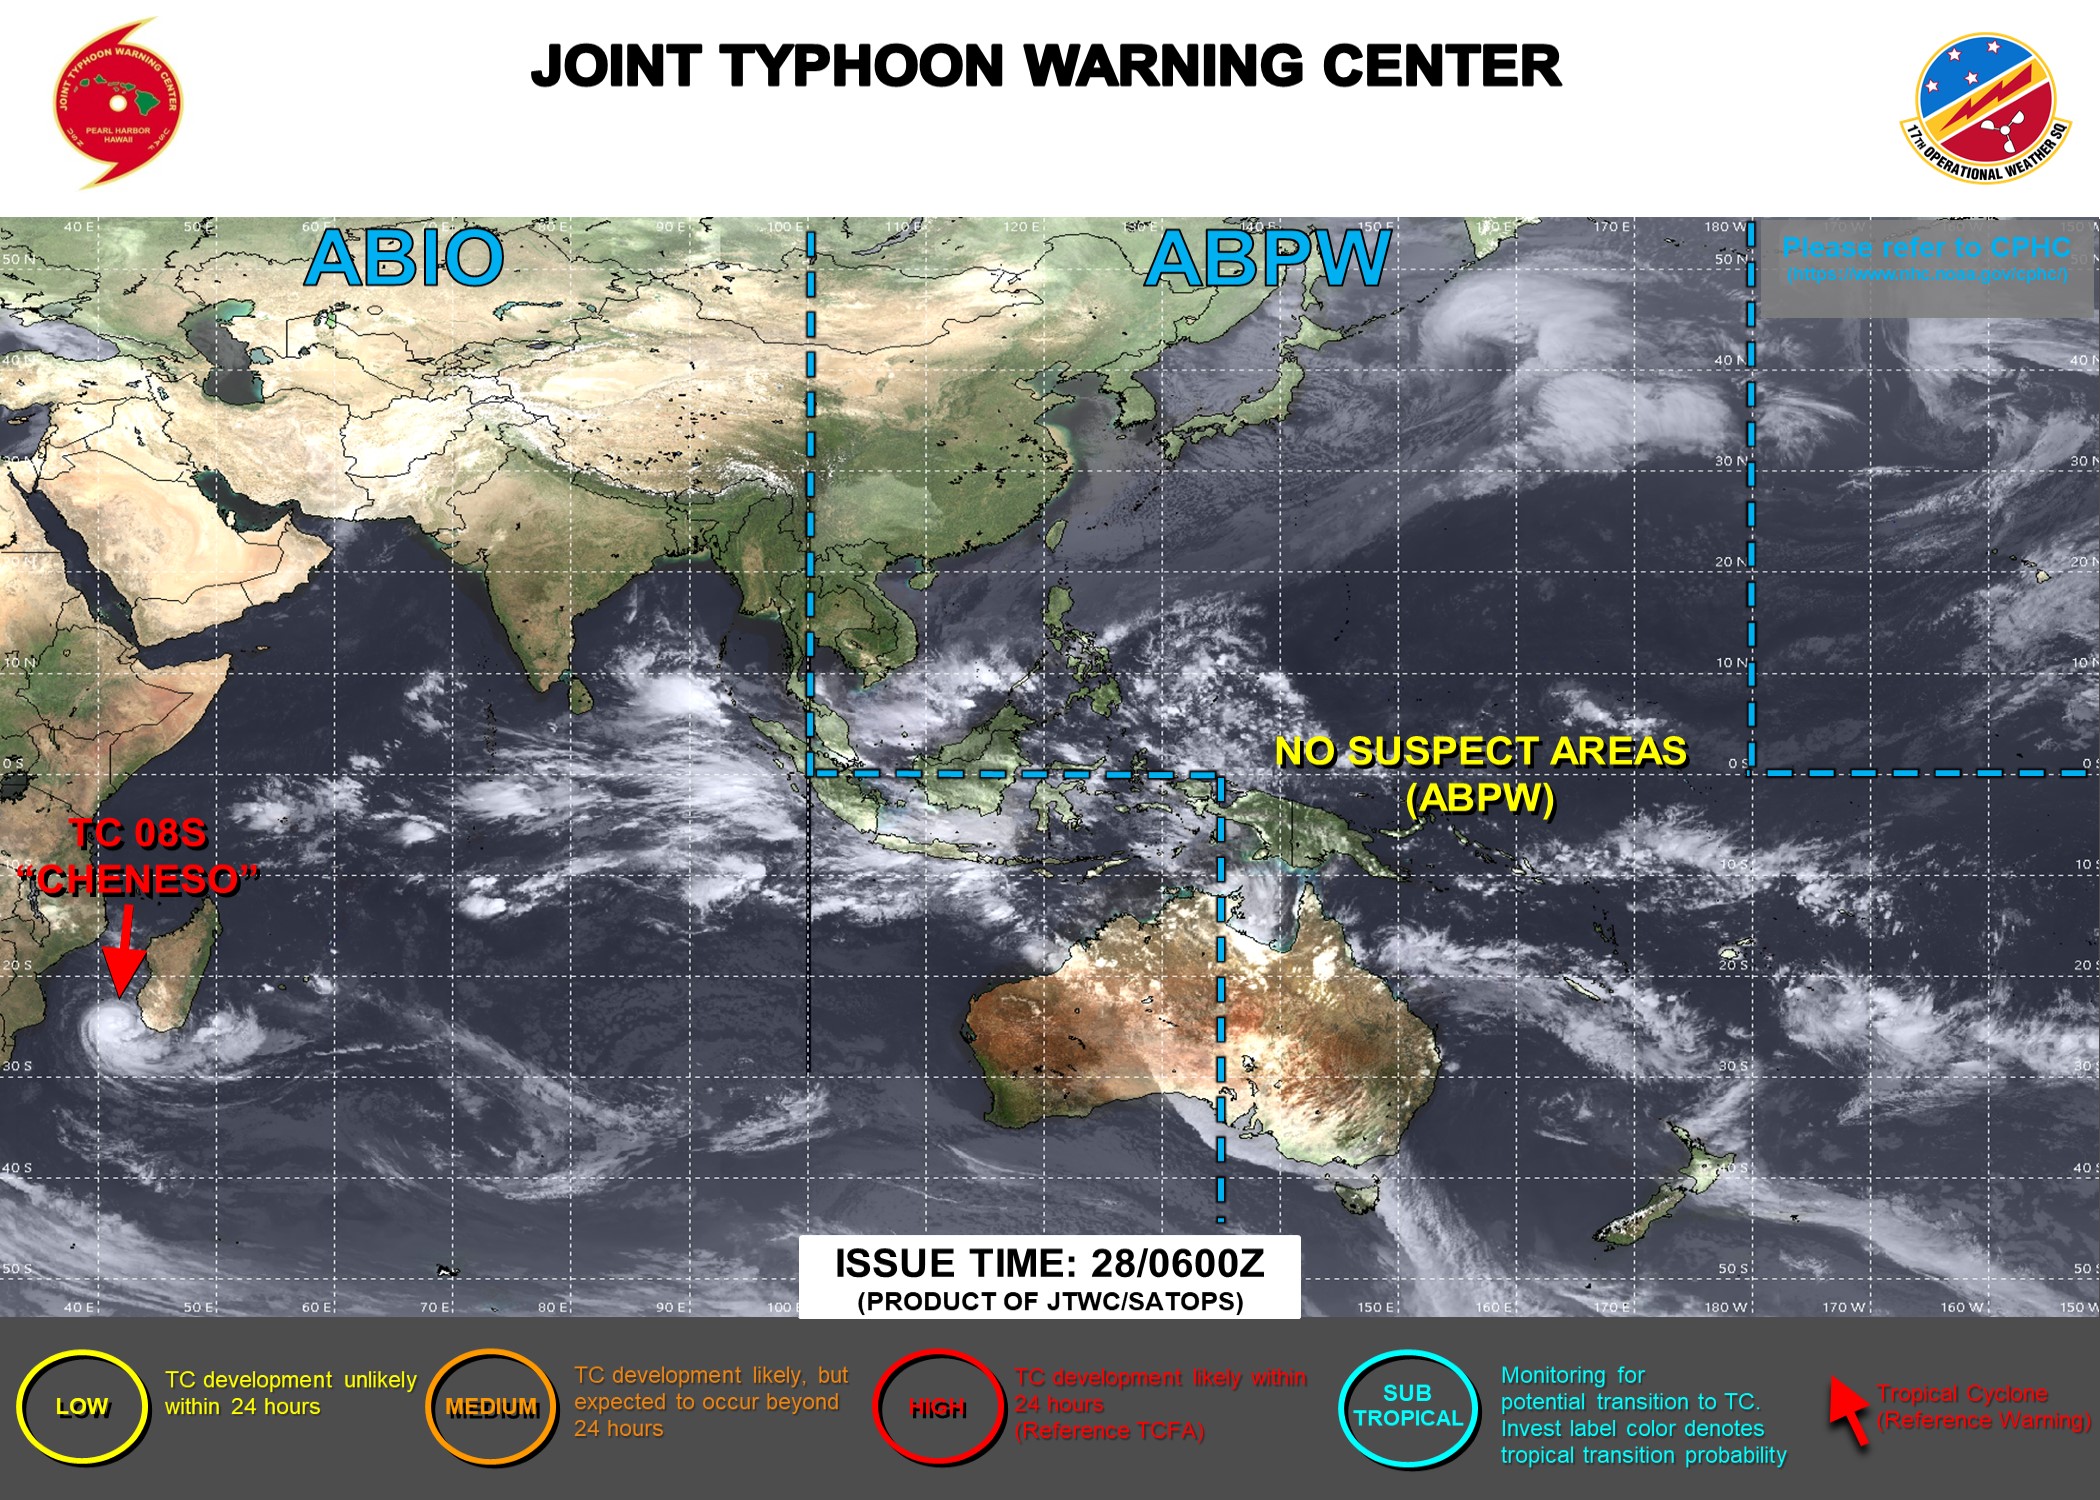 JTWC IS ISSUING 12HOURLY WARNINGS AND 3HOURLY SATELLITE BULLETINS ON TC 08S(CHENESO). 3HOURLY SATELLITE BULLETINS ARE NOW ISSUED ON INVEST 90B.